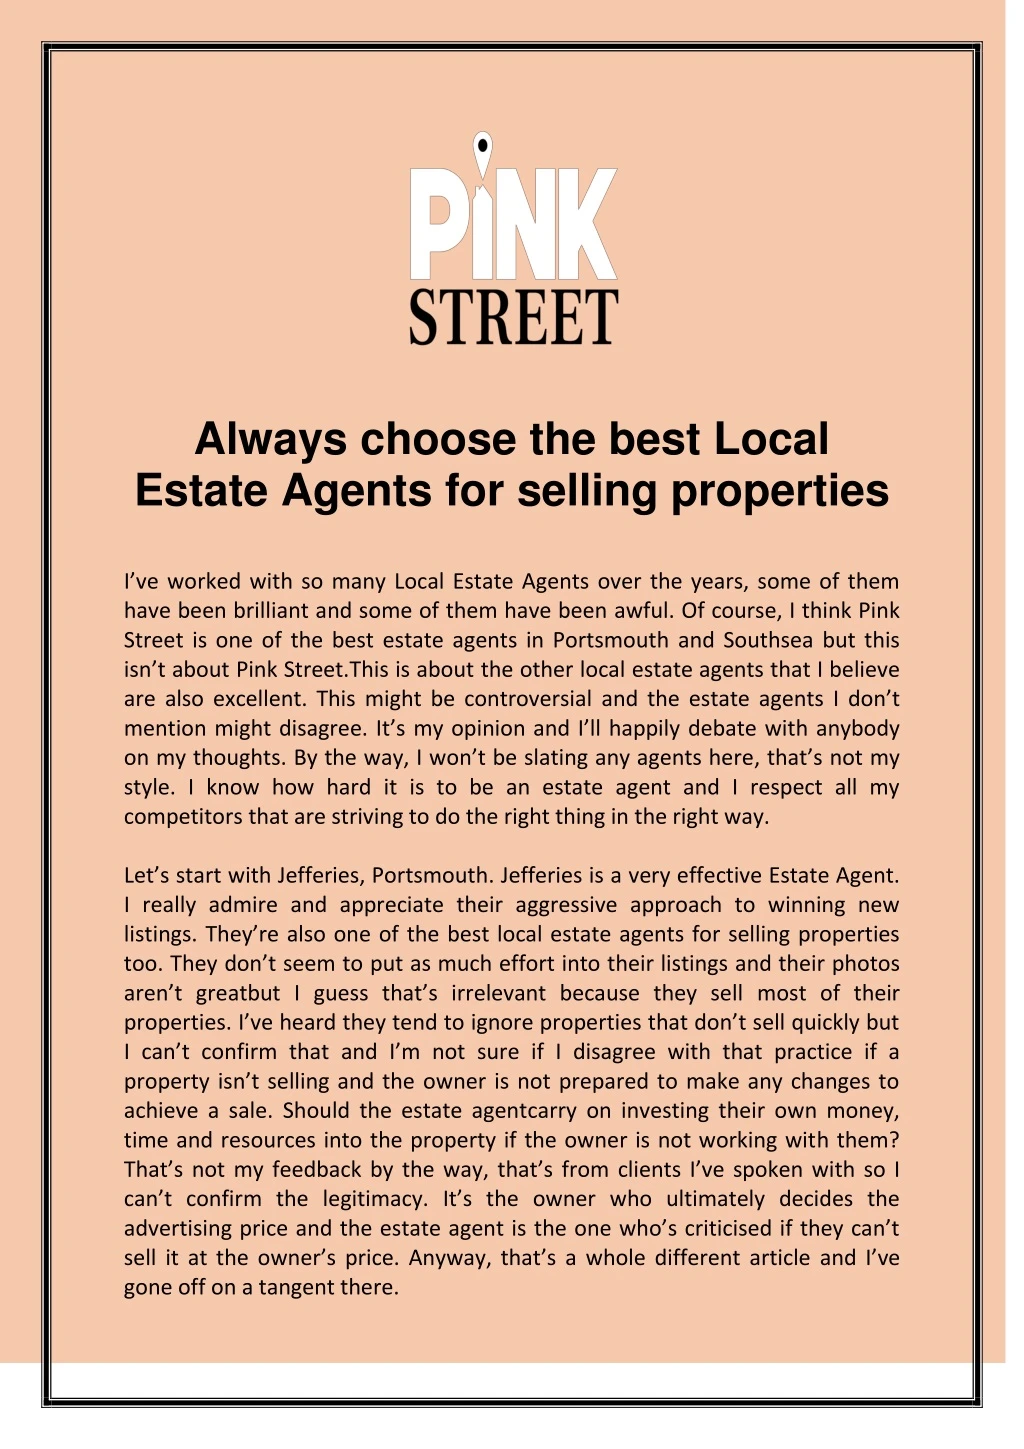 always choose the best local estate agents